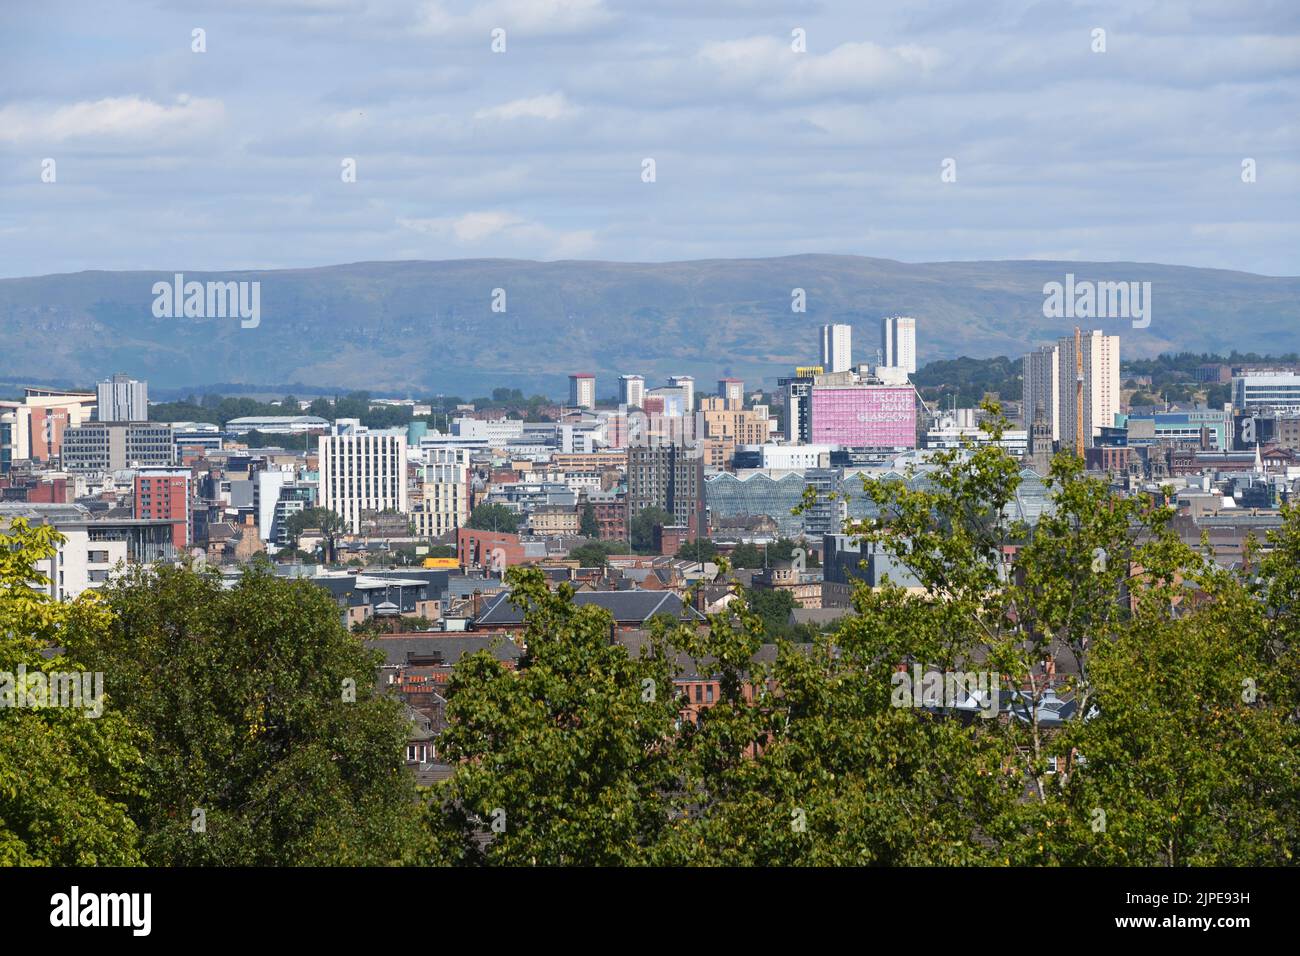 Glasgow, Scotland, UK. 17th, August, 2022. Glasgow weather. Warm sunshine replaced the rain of the last few days. A view of Glasgow city centre's iconic pink 'People Make Glasgow' sign and the Campsie hills in the background.  Credit. Douglas Carr/Alamy Live News Stock Photo